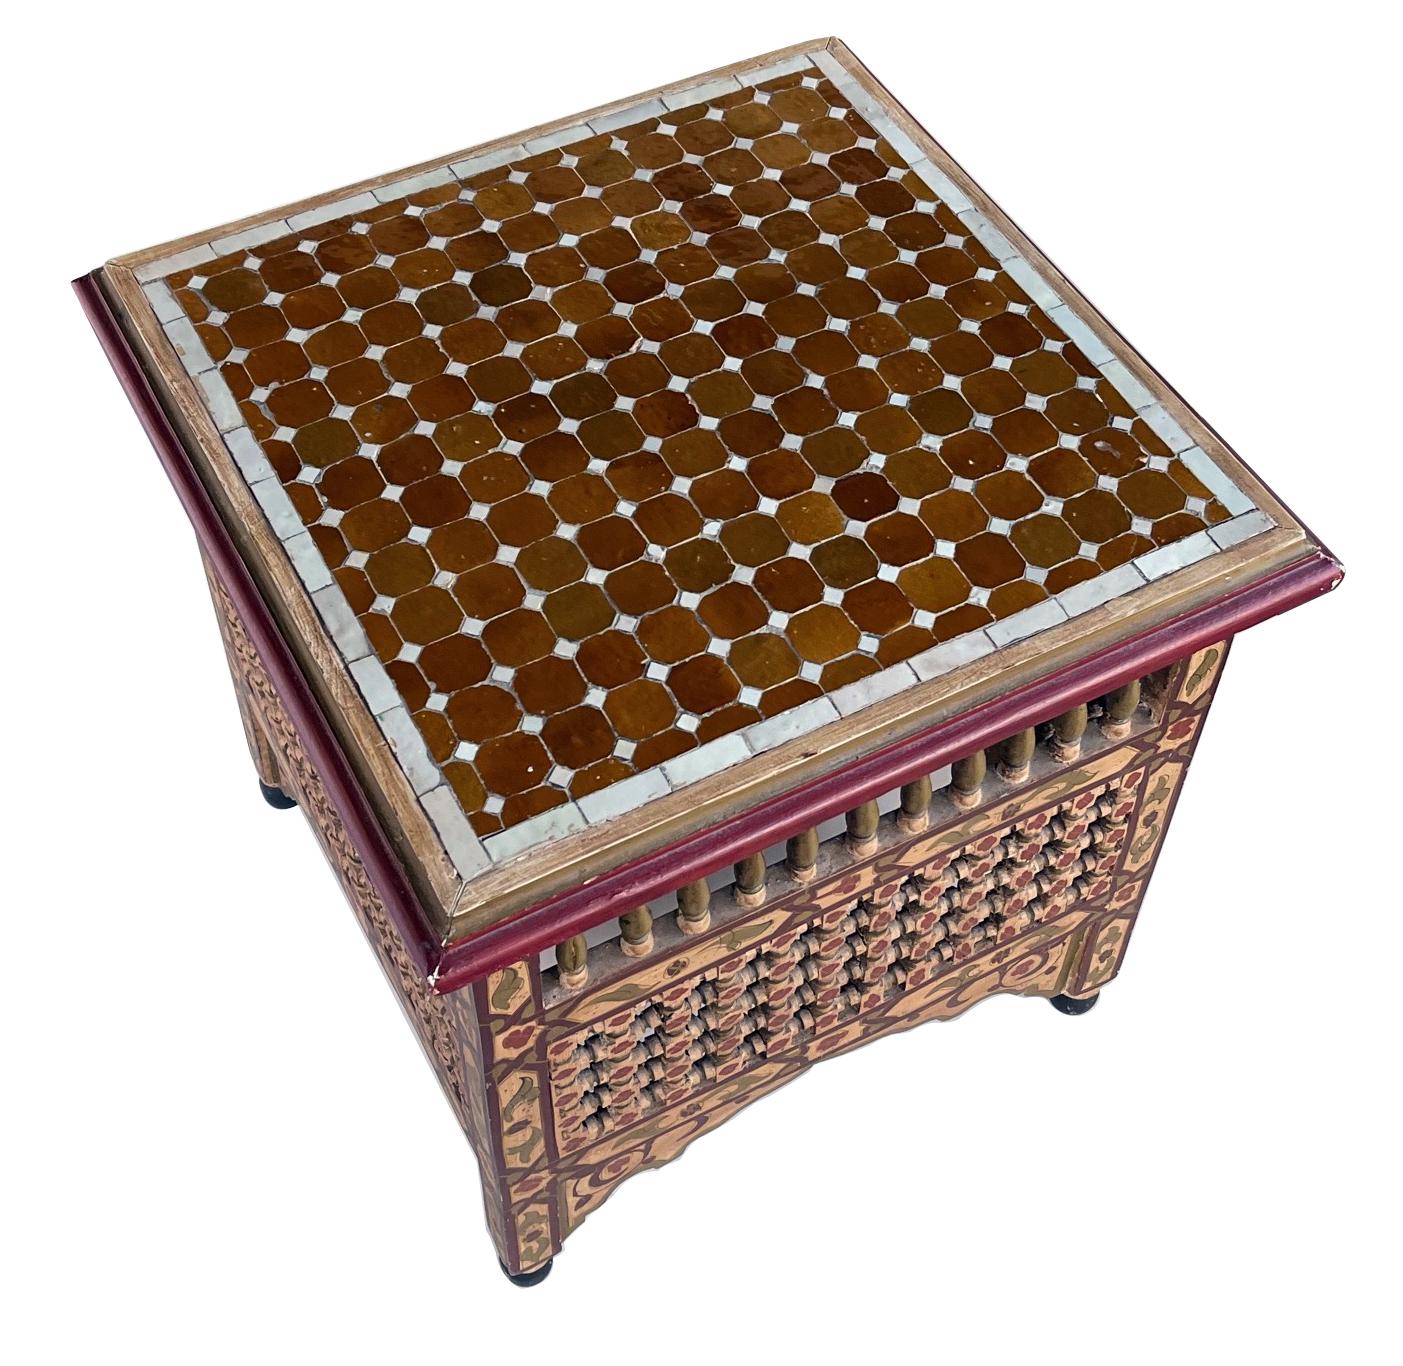 Mid-20th Century Moorish Style Polychromed Square Table with Tile Top For Sale